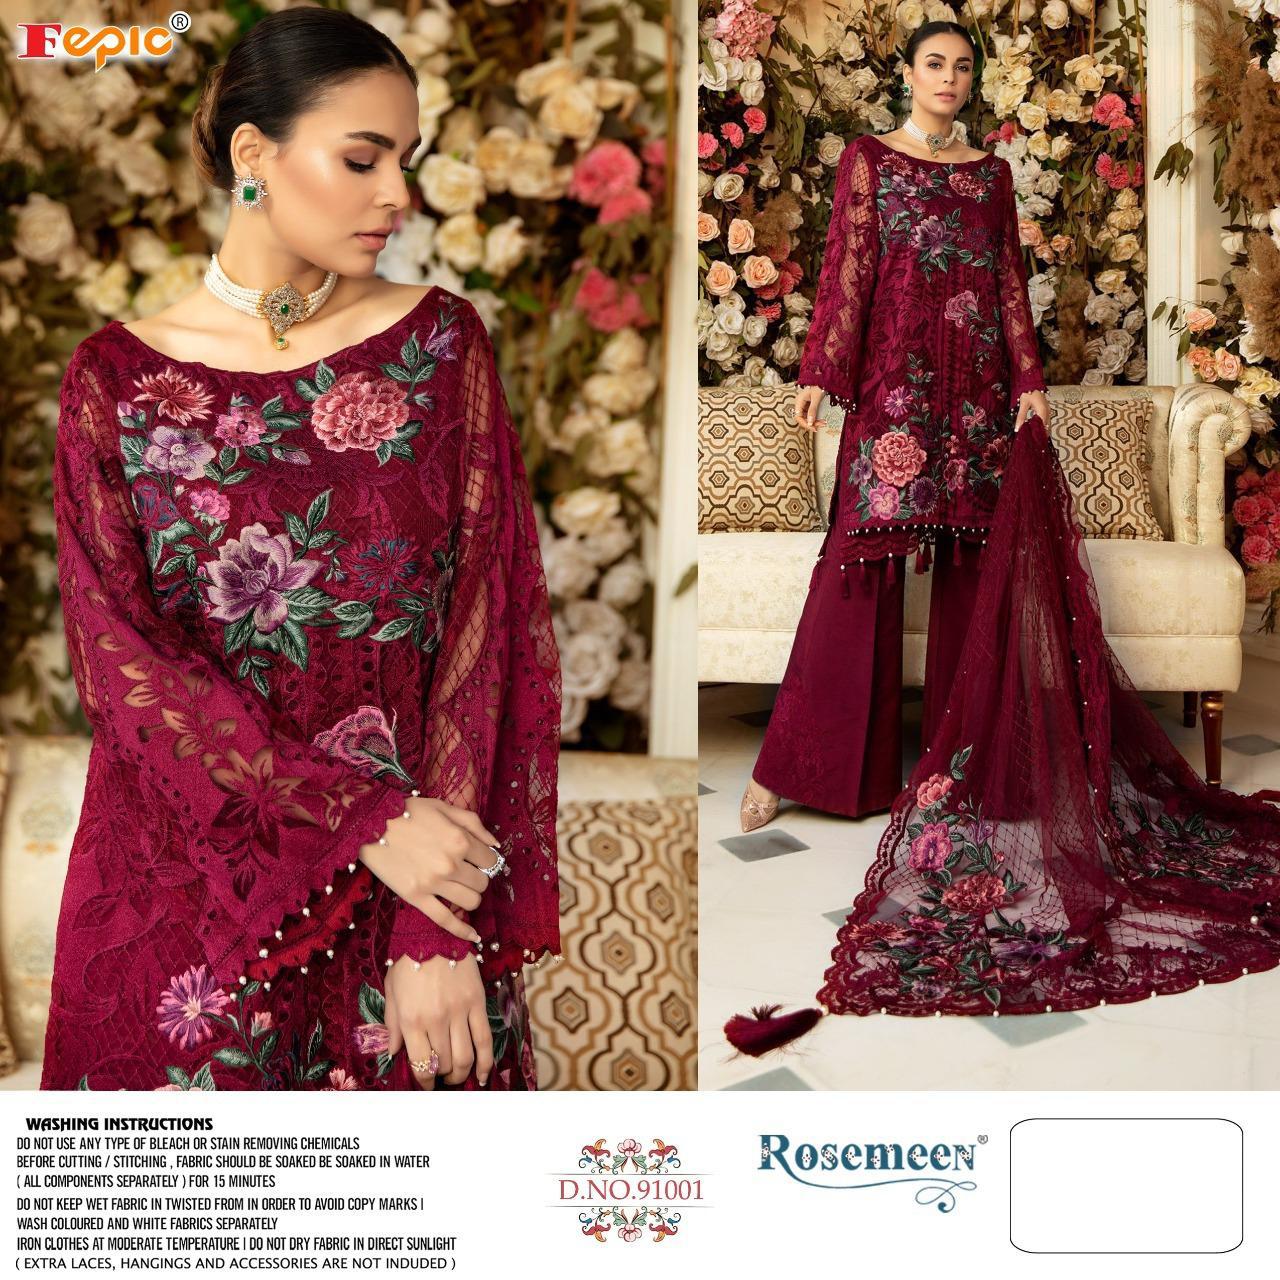 FEPIC ROSEMEEN 91001 RED PAKISTANI SUITS SUPPLIER